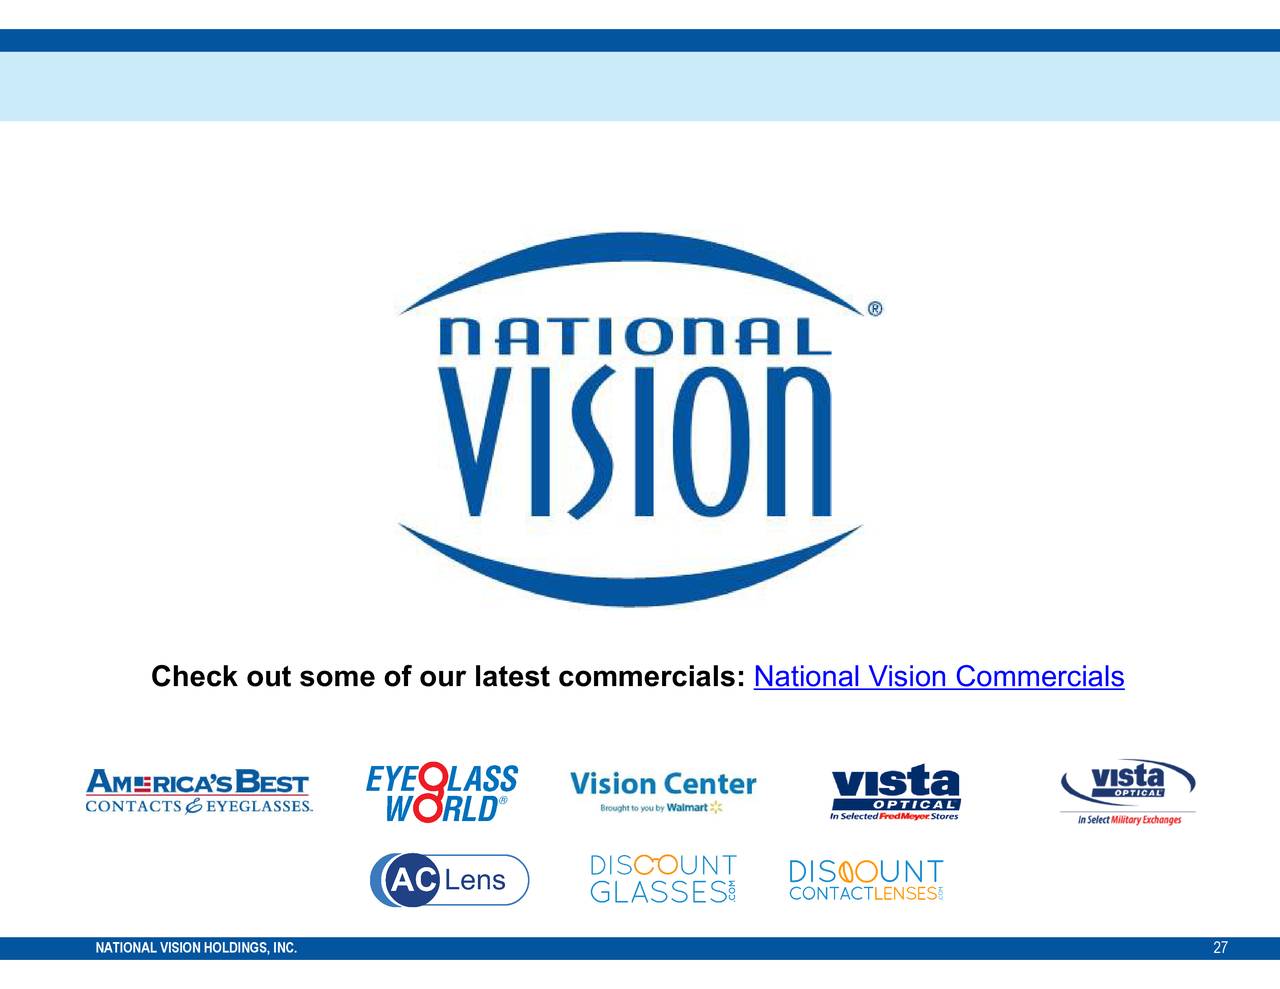 National Vision Holdings, Inc. 2020 Q3 Results Earnings Call